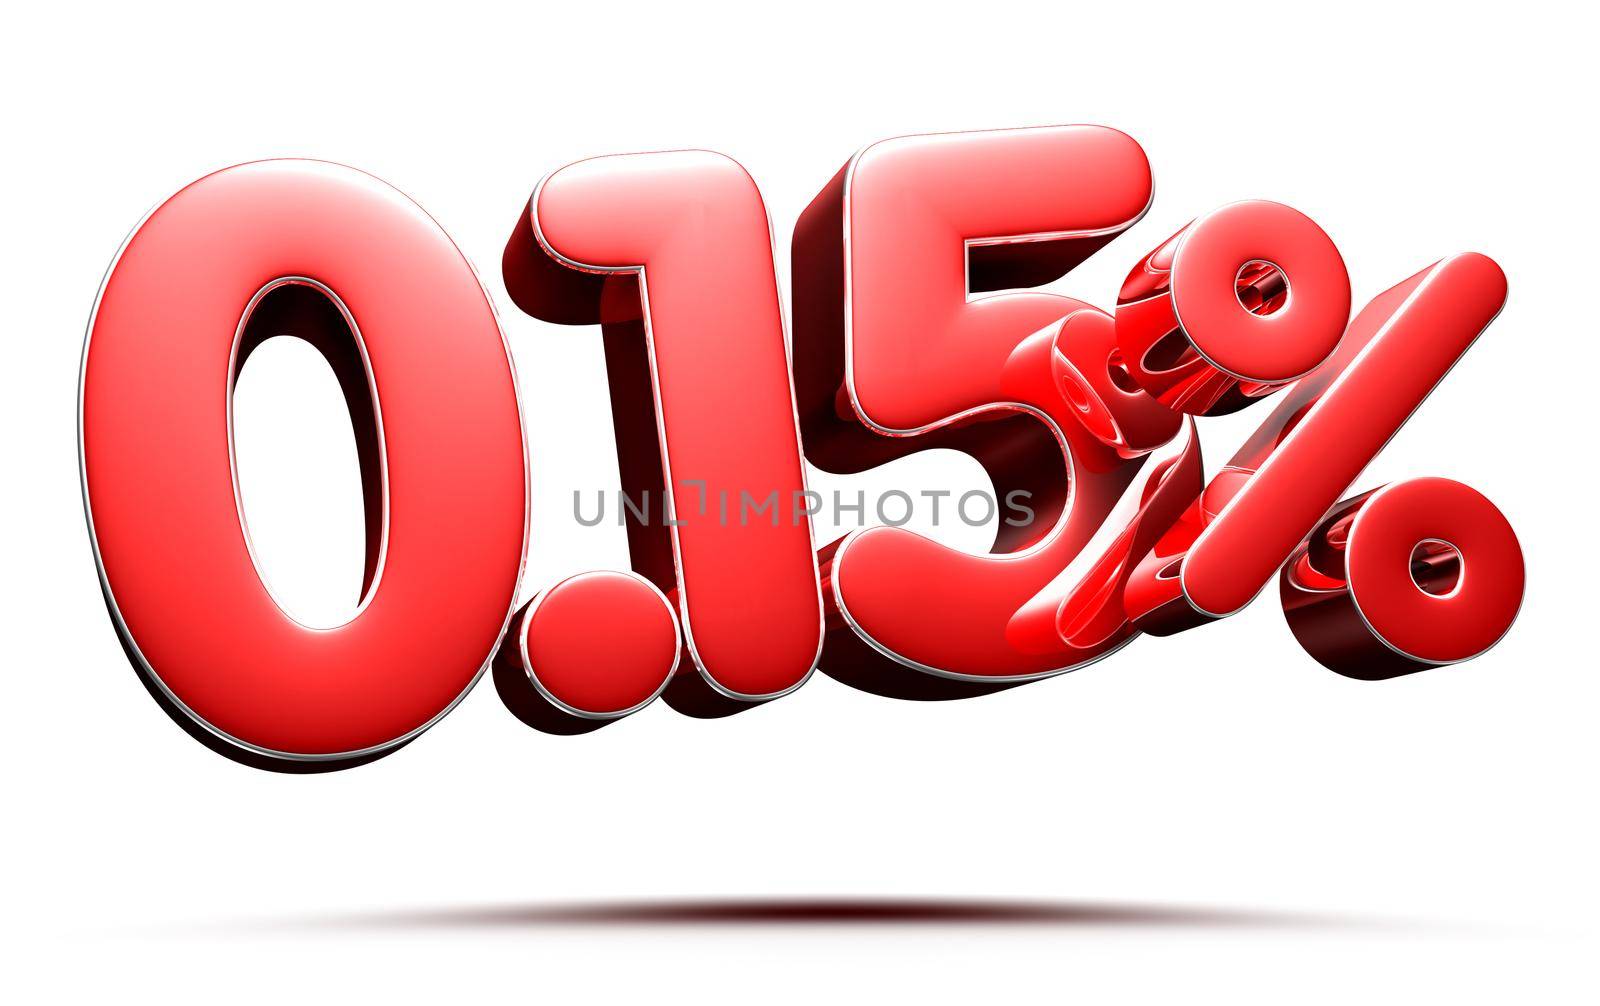 0.15 percent red on white background illustration 3D rendering with clipping path.